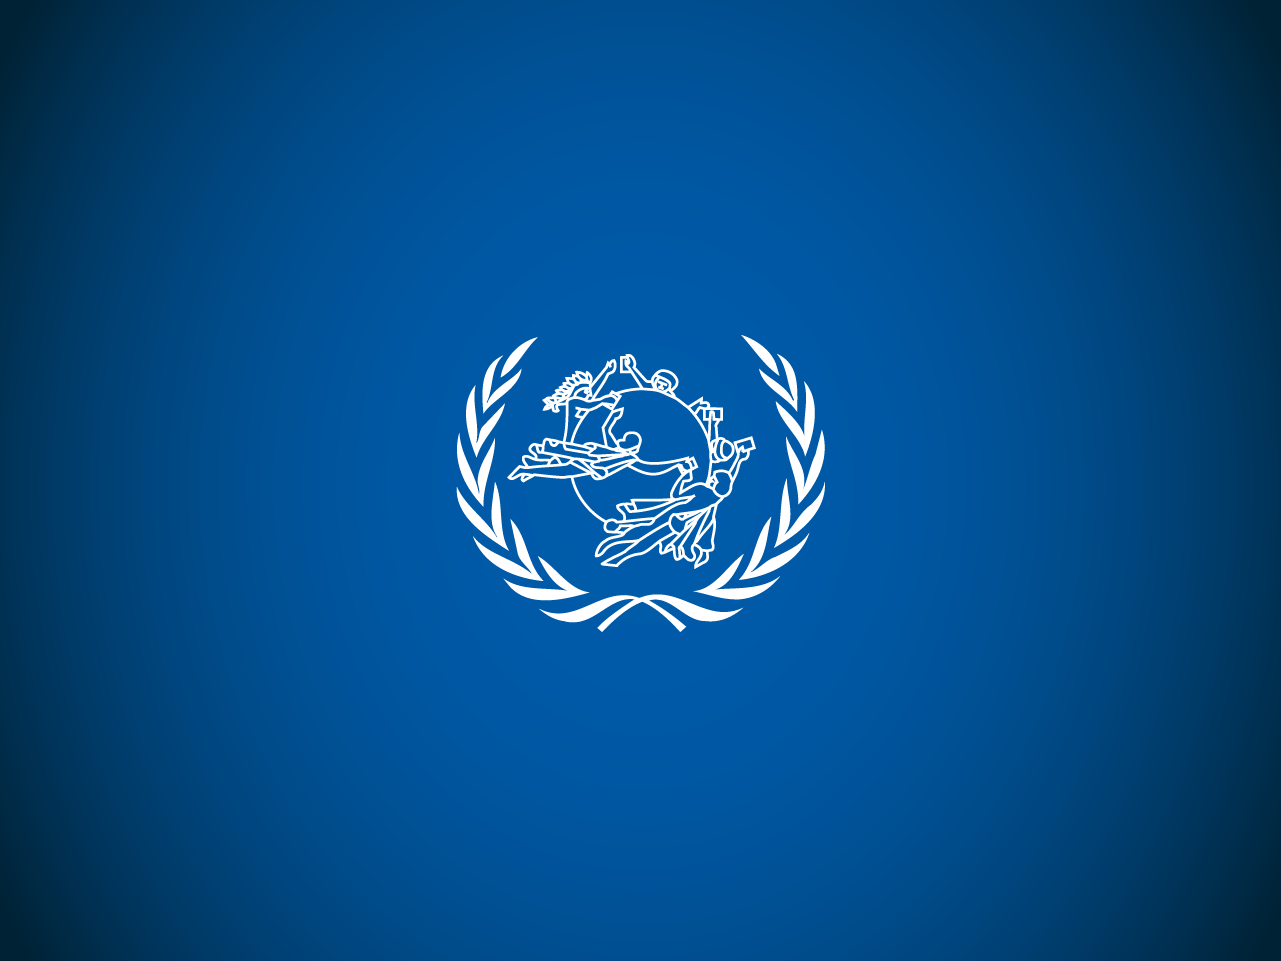 Statement by the Director General of the International Bureau of the UPU on the conflict in Ukraine